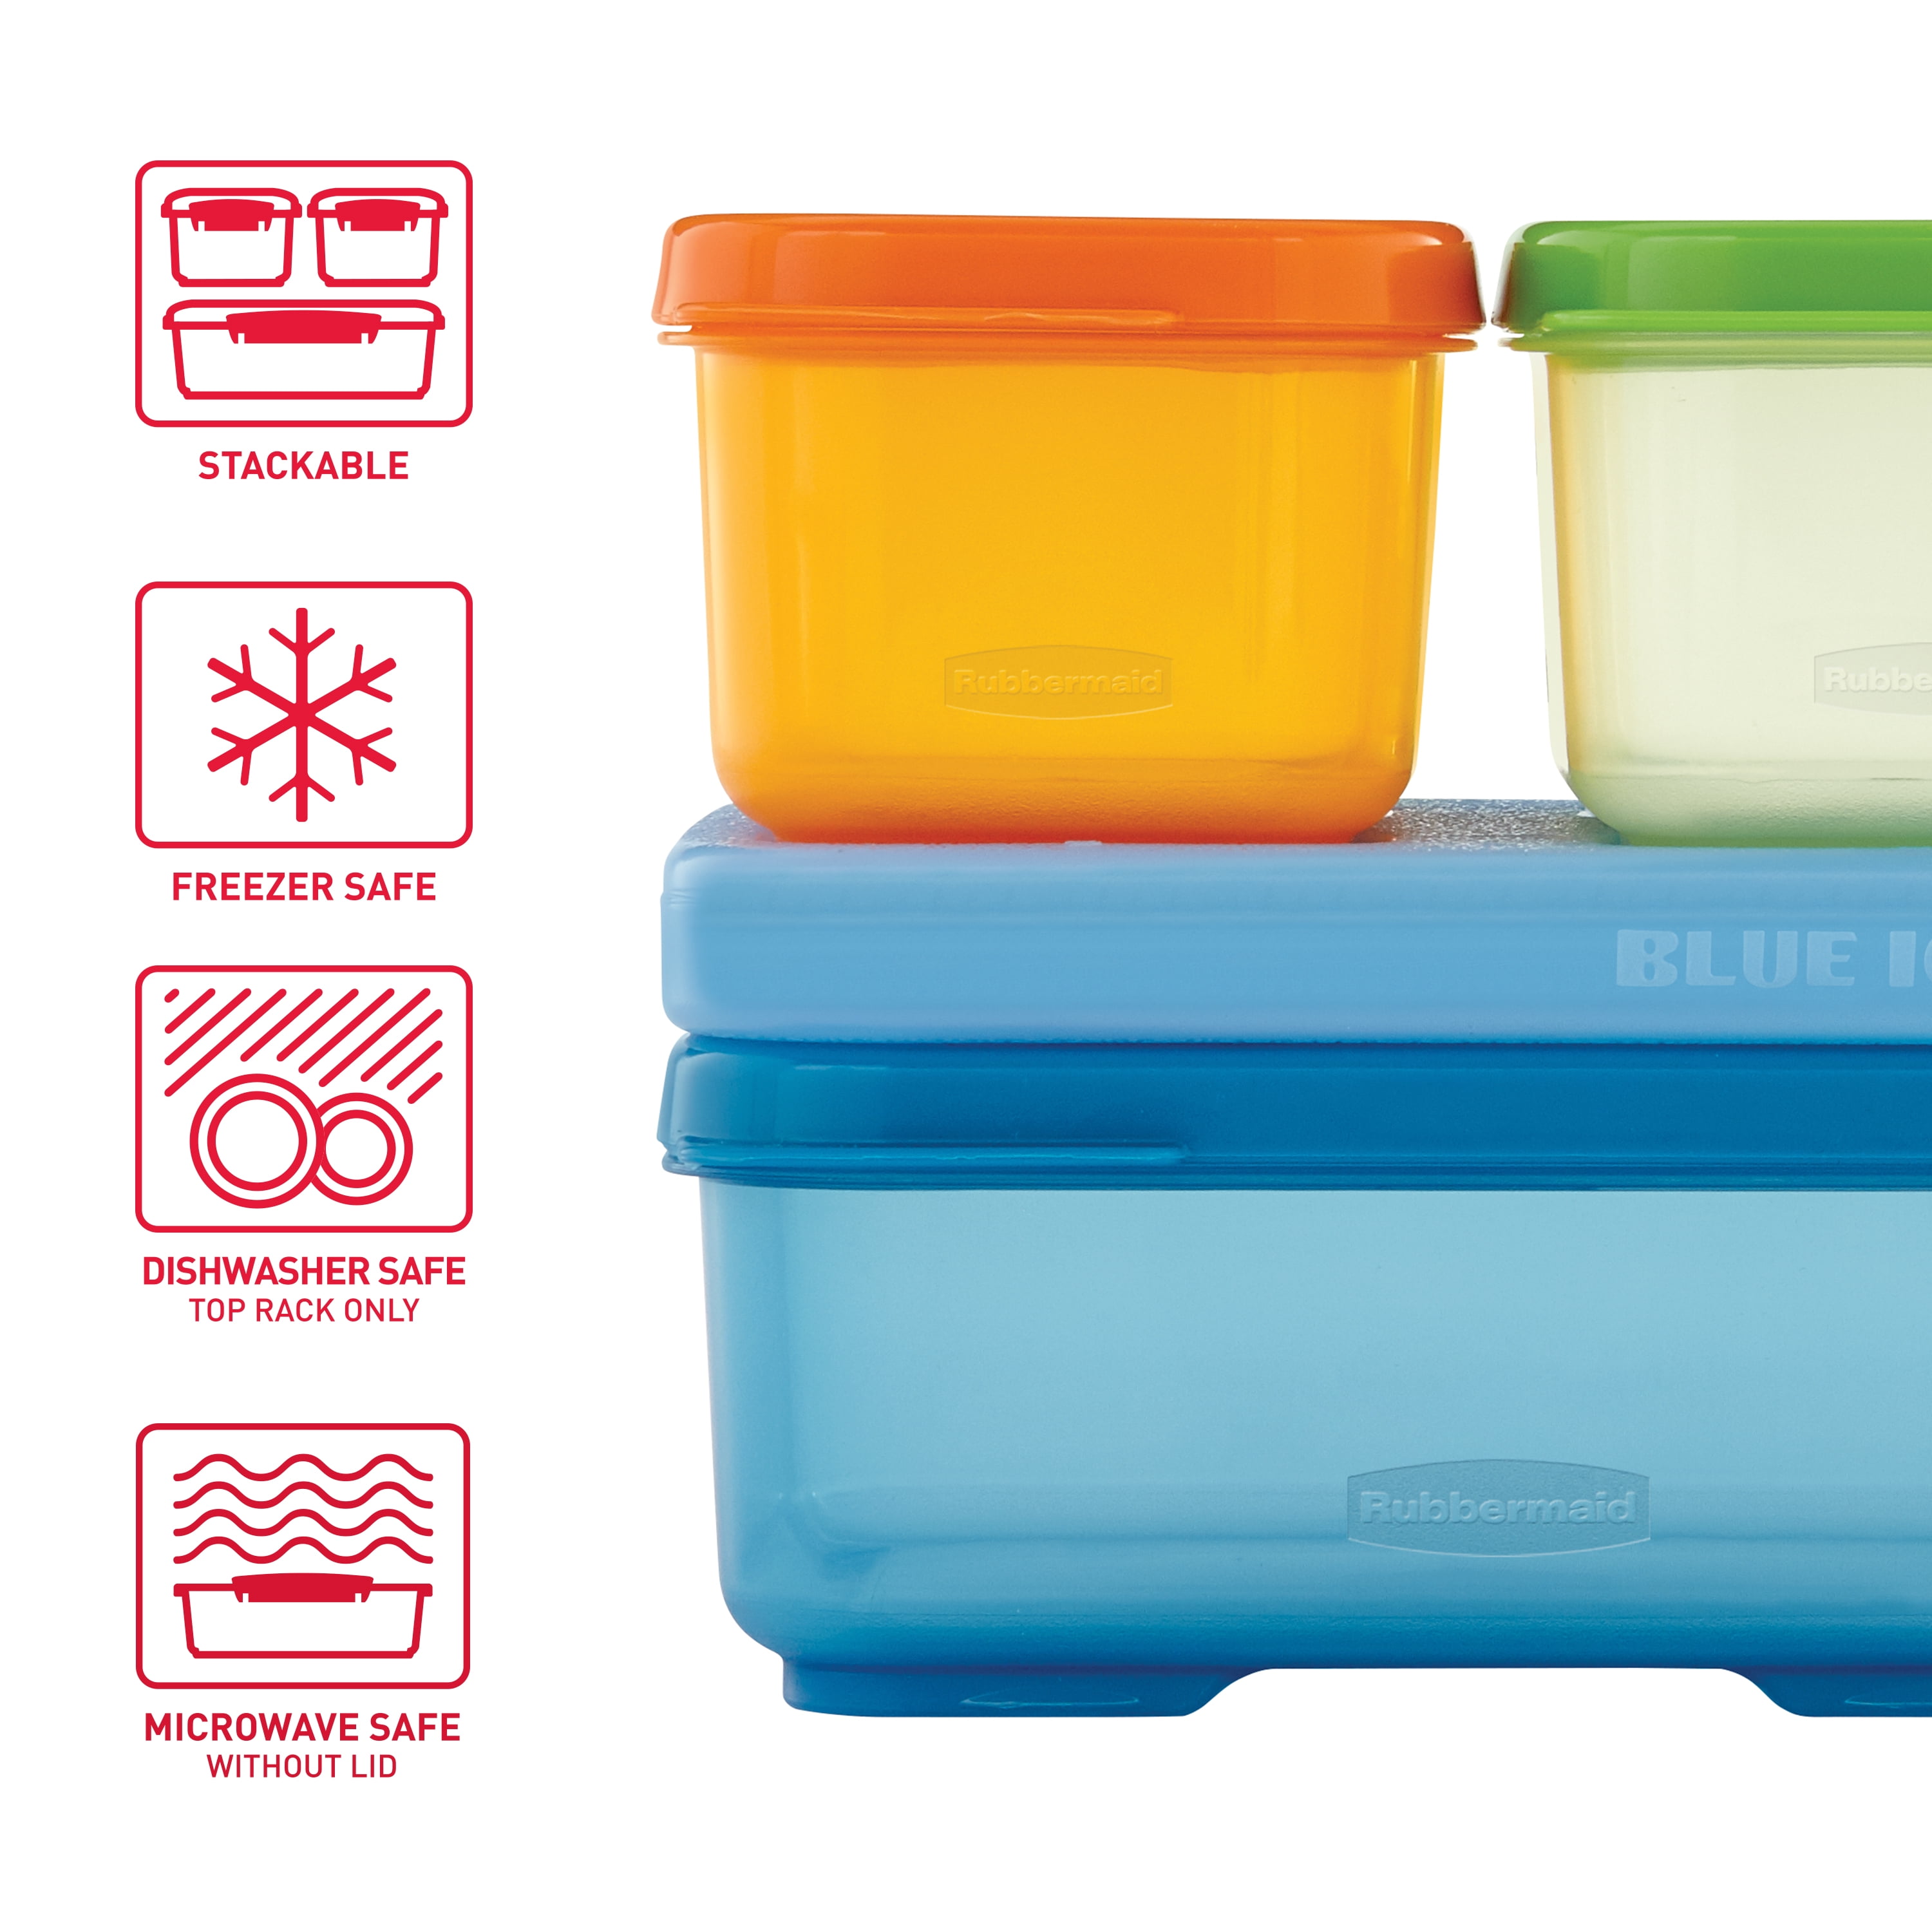 Rubbermaid Lunchblox Entrée With Dividers (1 ea), Delivery Near You